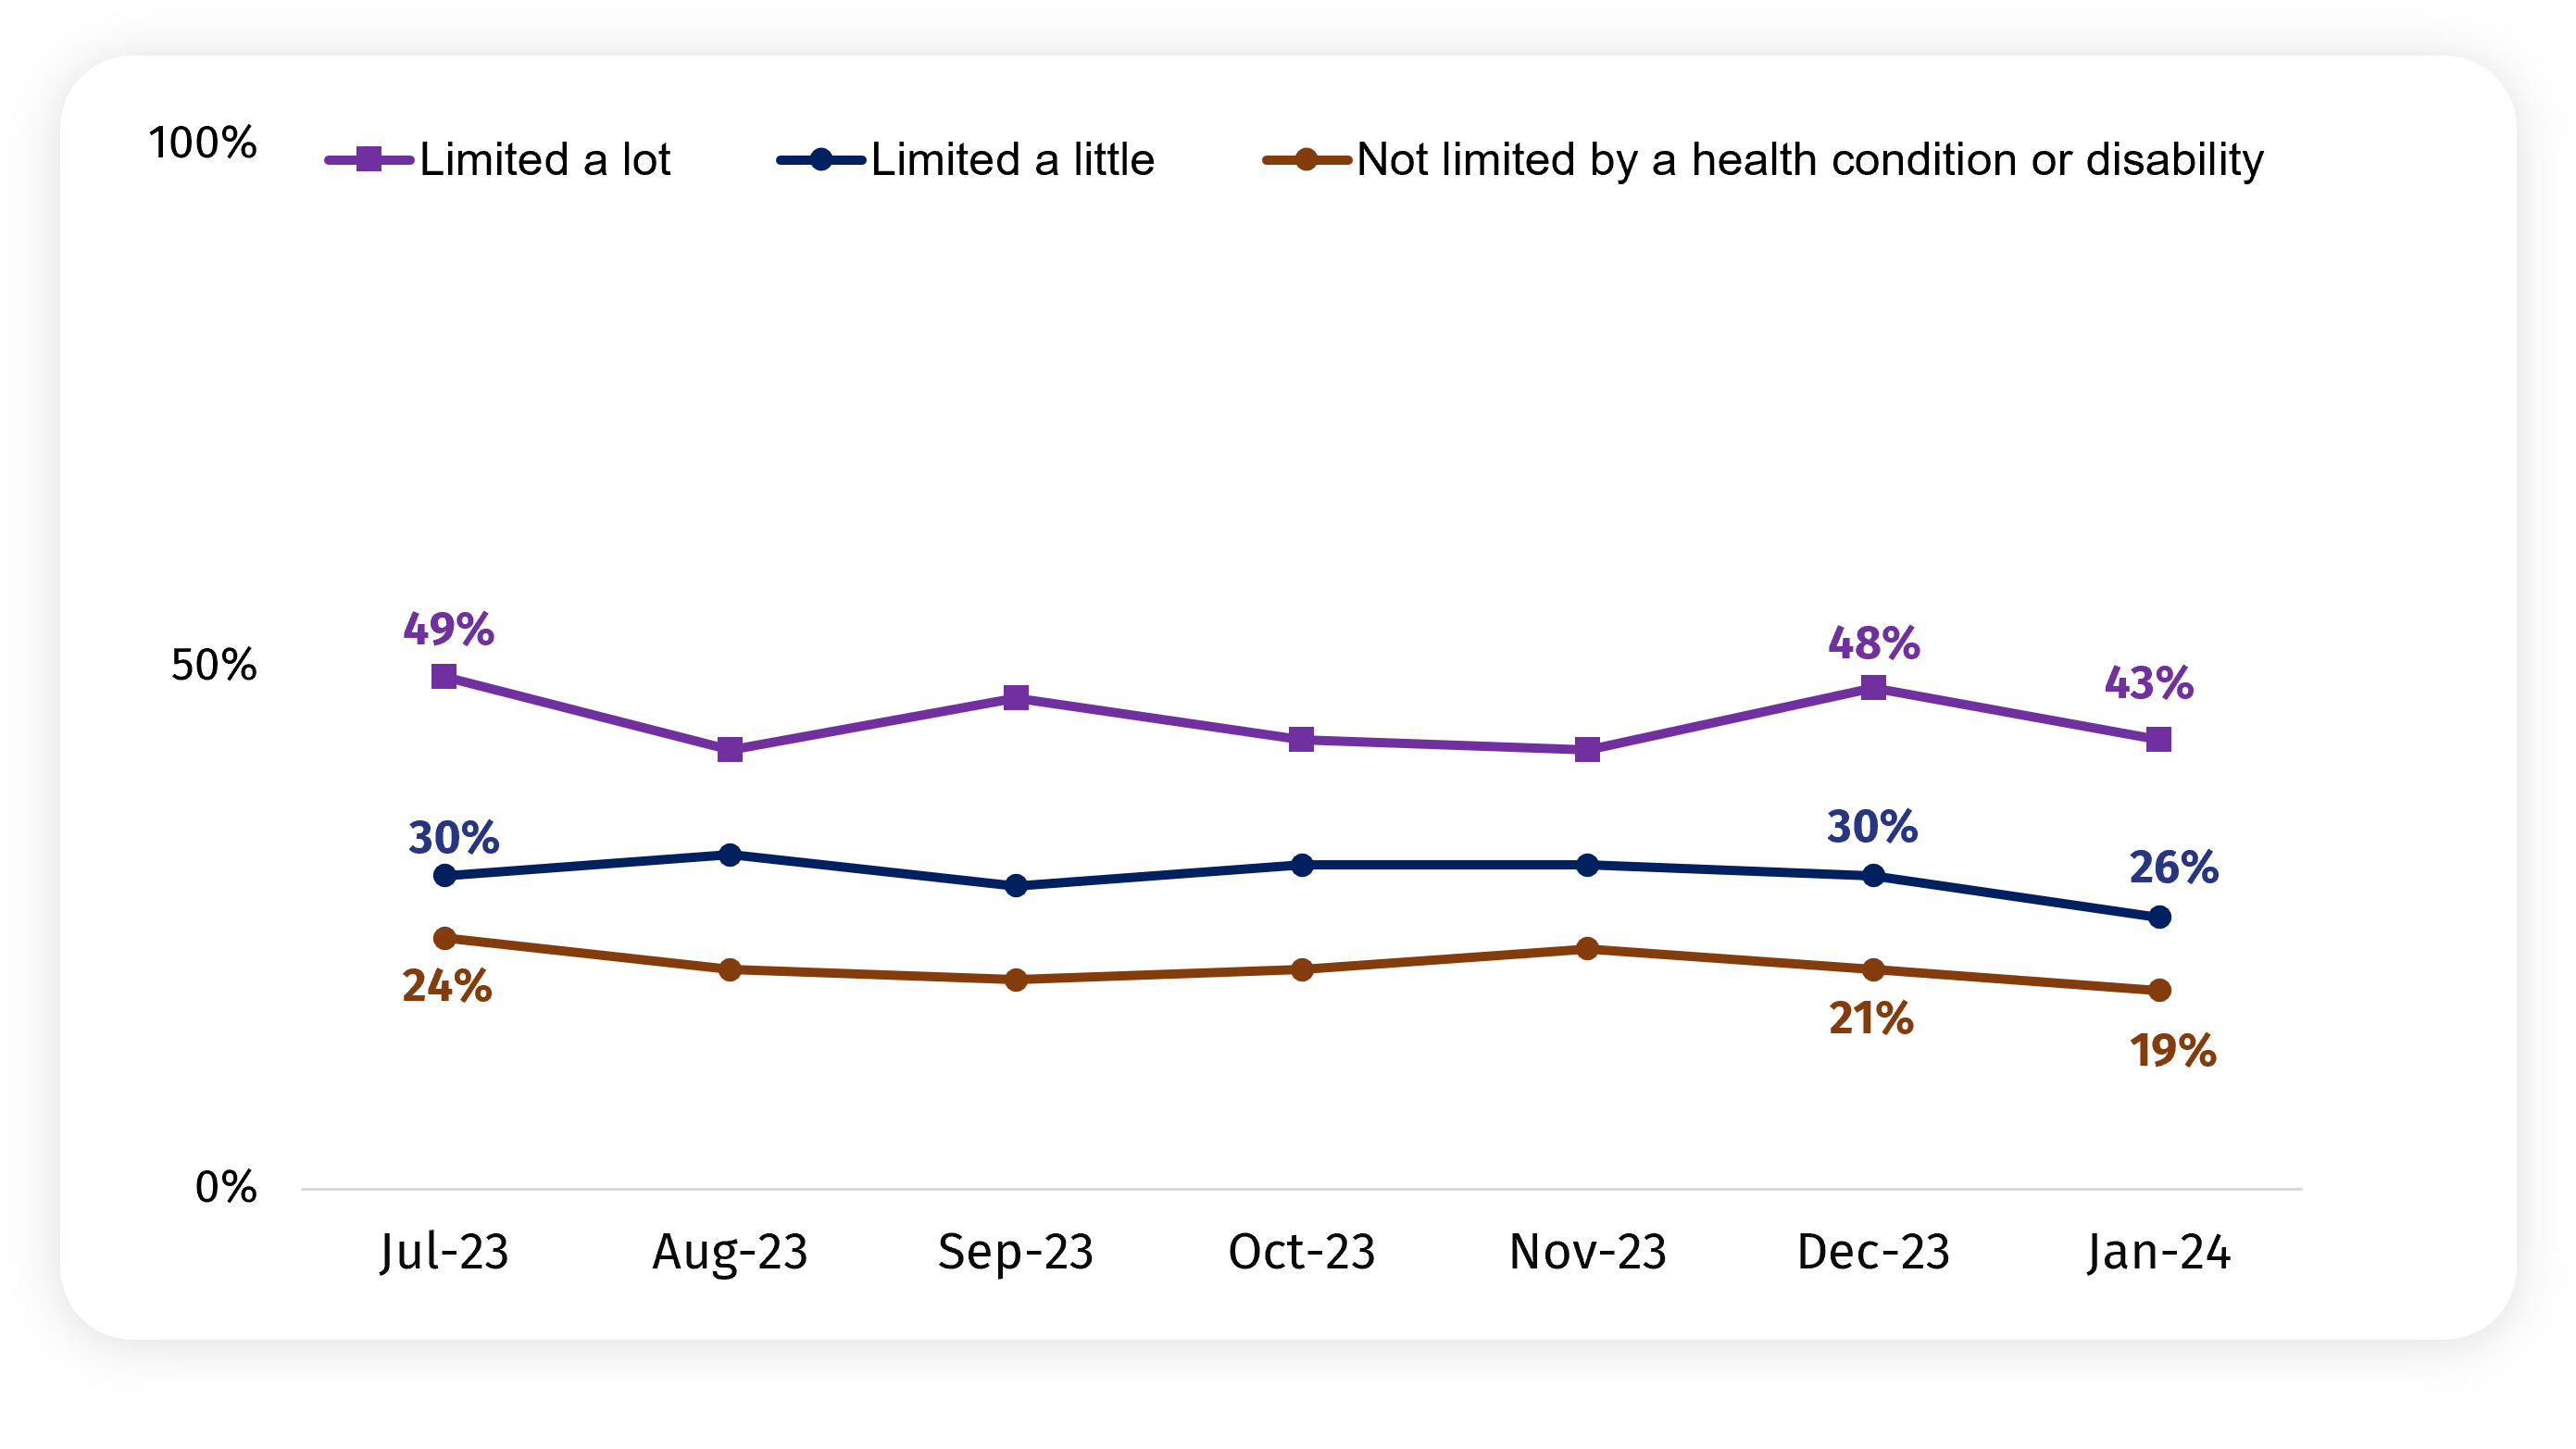 The chart shows the proportion of those who are concerned about food affordability by limiting health problem or disability. In January, it is 43% among those limited a lot, 26% among those limited a little, and 19% among those not limited.